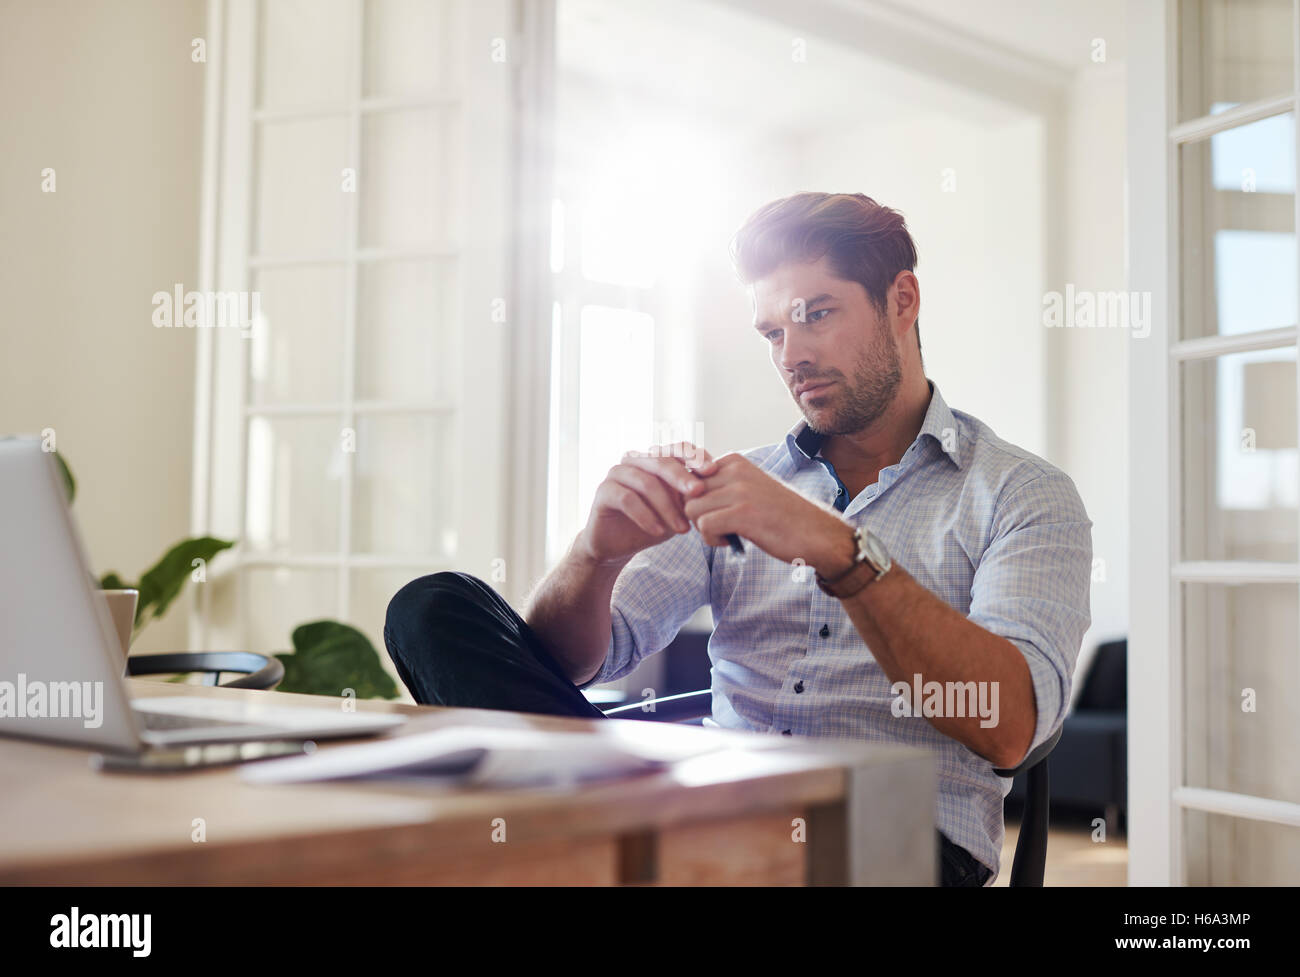 Shot of young man sitting at table looking at laptop and thinking. Thoughtful businessman working at home office. Stock Photo